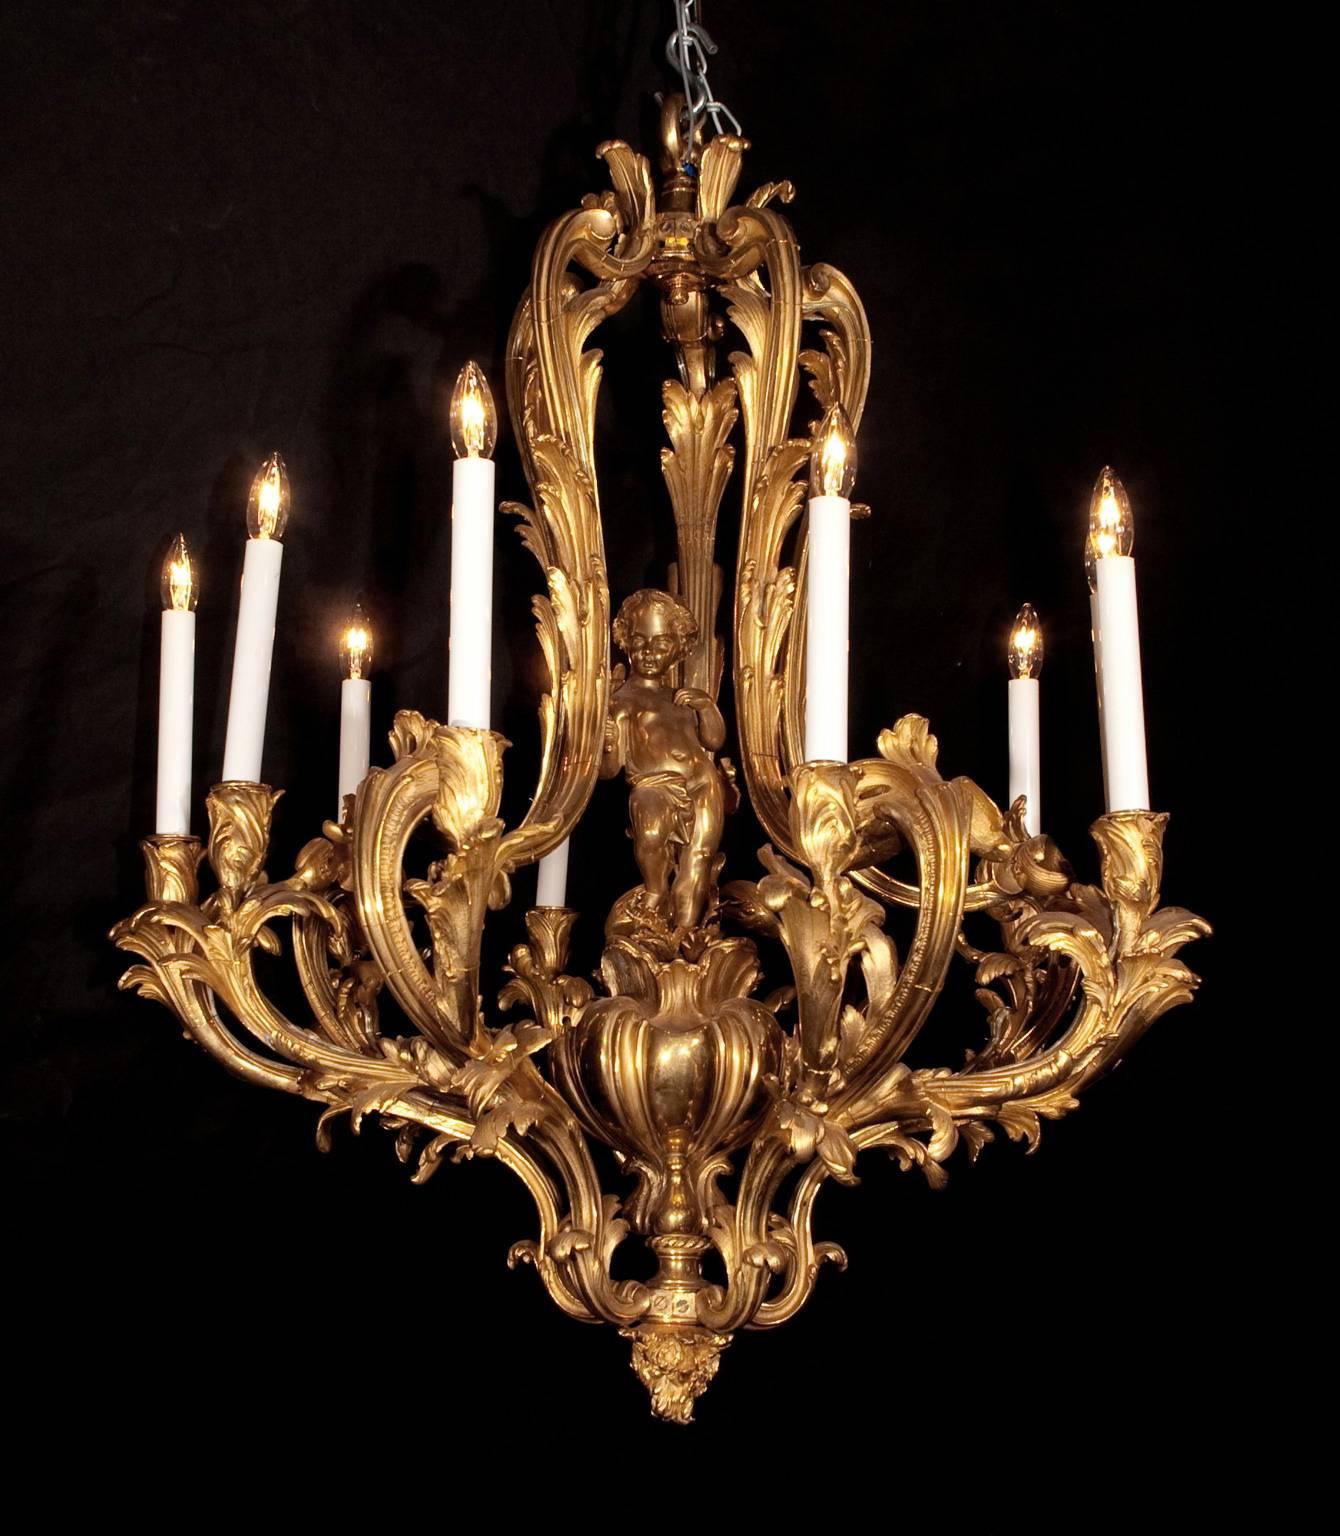 This exquisite French 19th century Napoleon III chandelier features an intense and beautiful bronze d’ore. The piece is adorned with acanthus leaves; note the movement on the arms, growing to the top, and the flower bulb like candle cups. Lastly, a